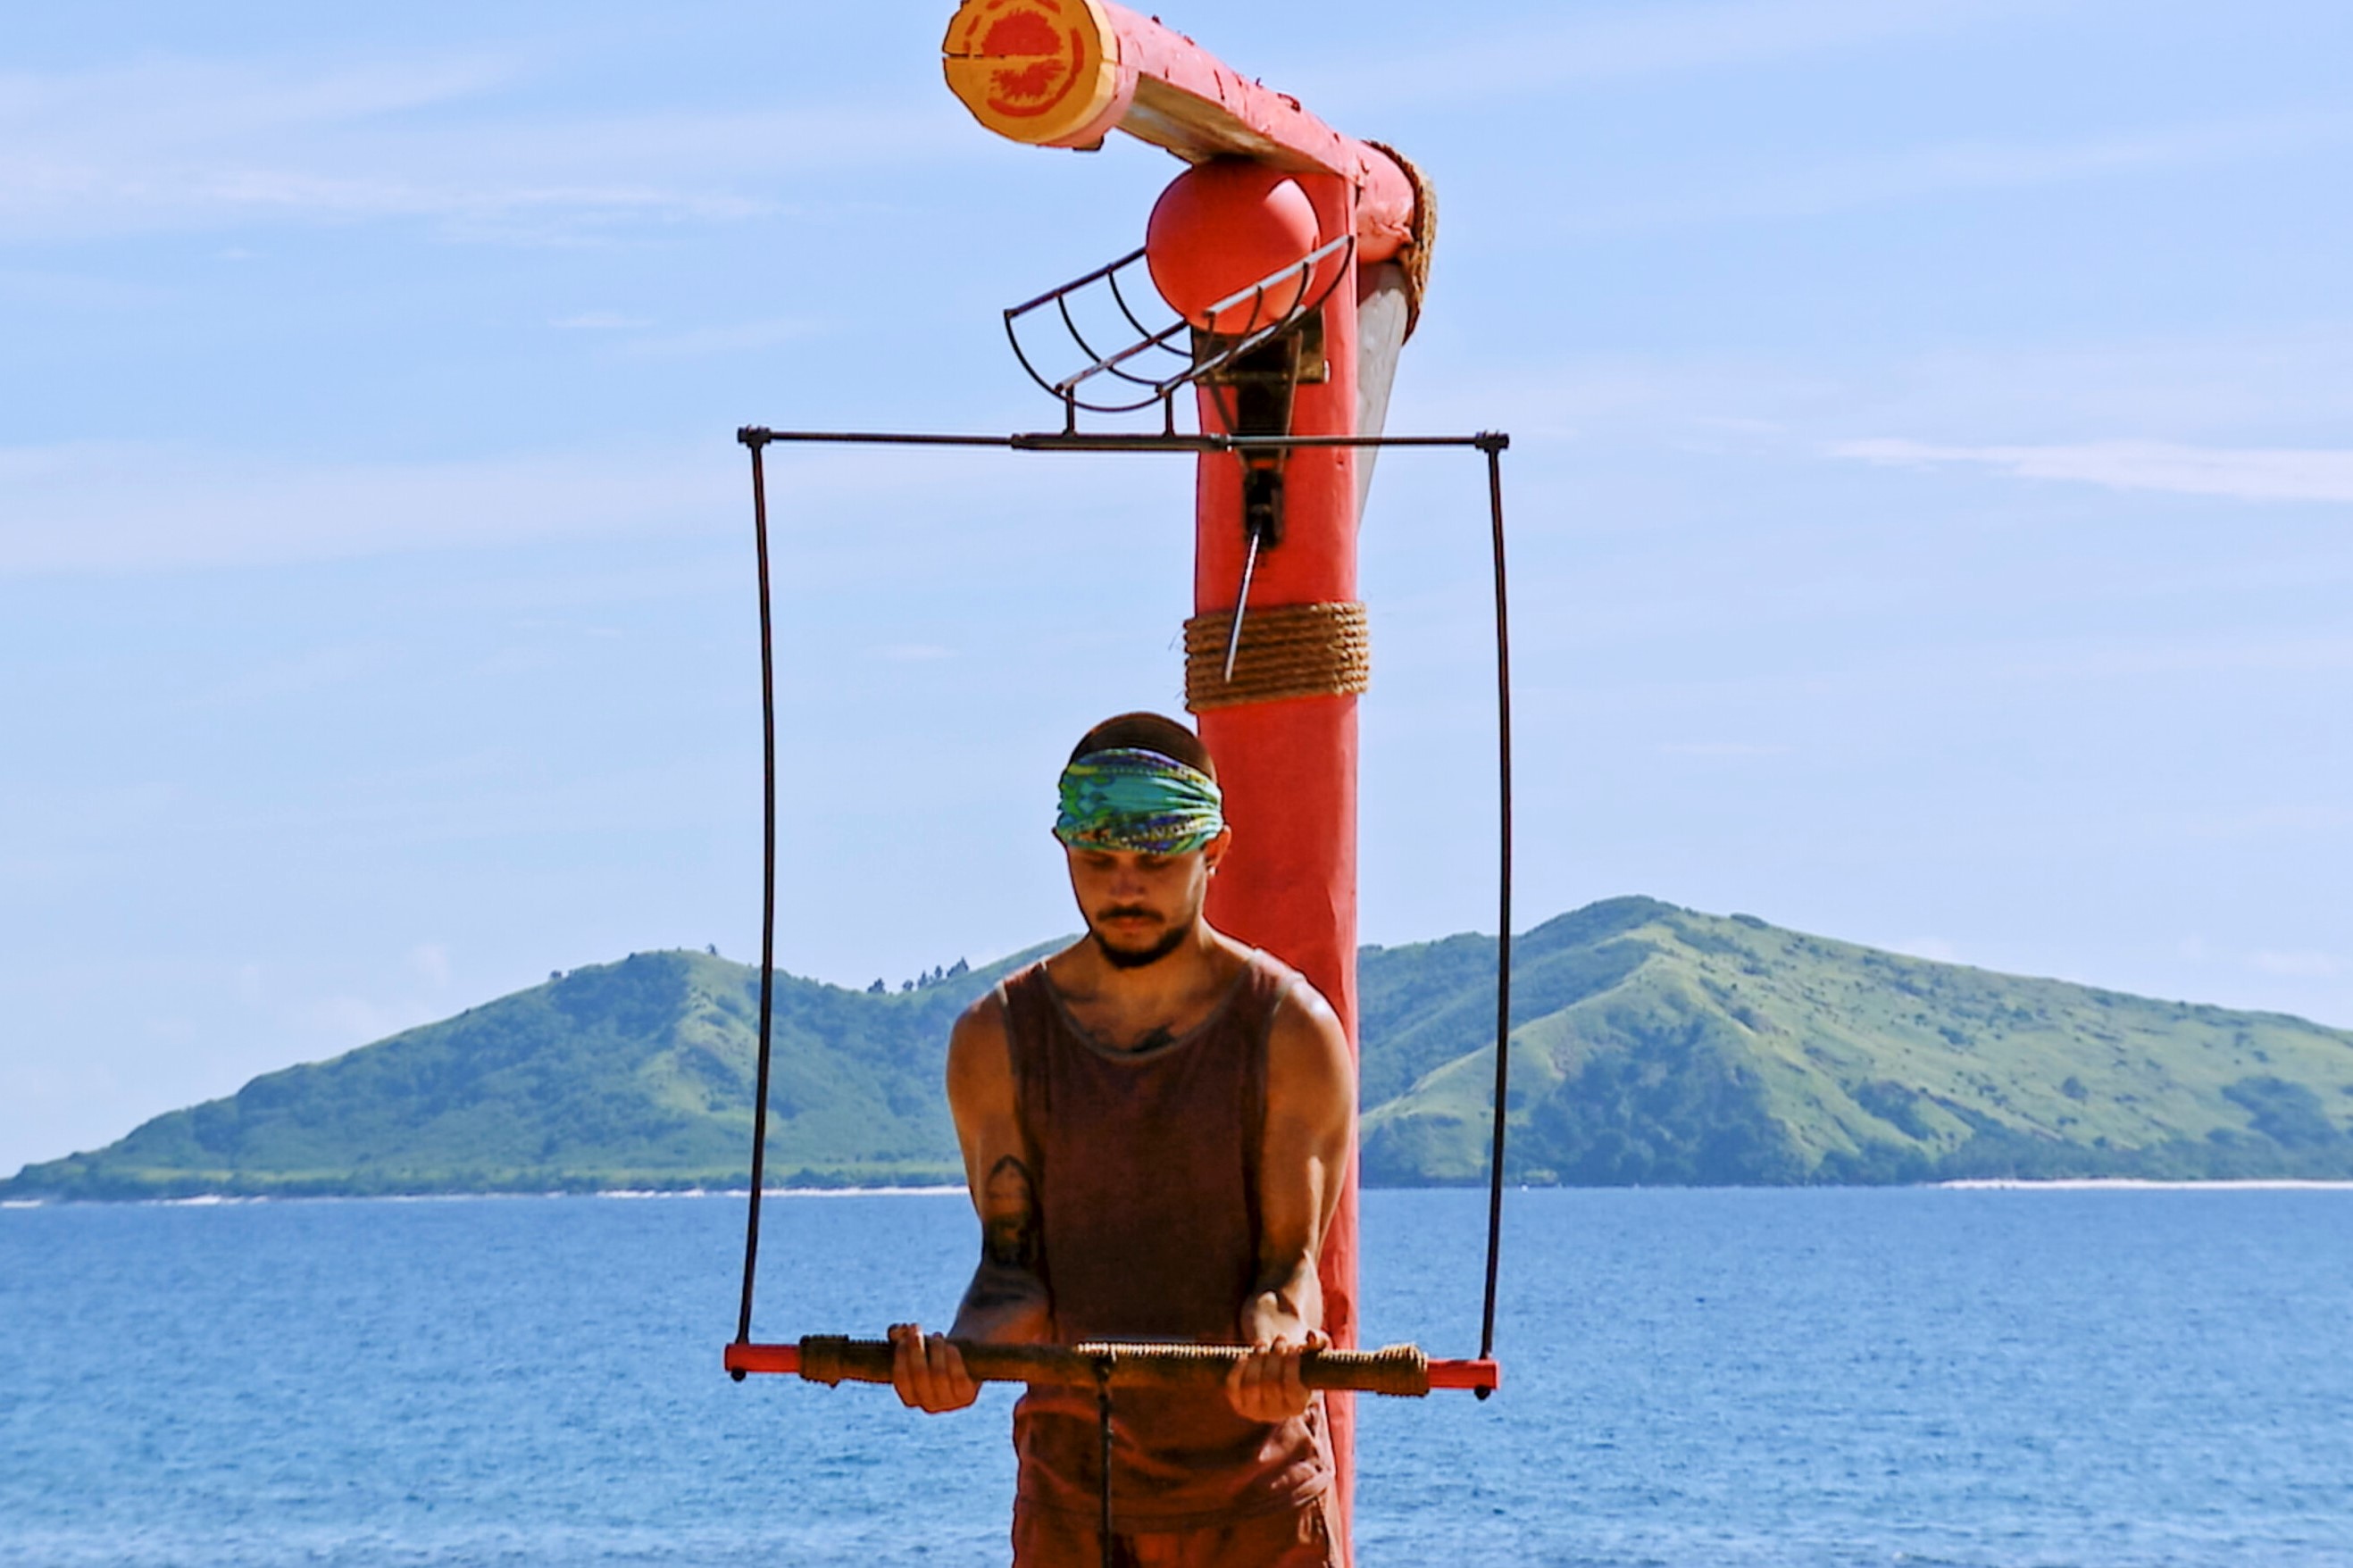 Jesse Lopez, who stars in 'Survivor 43' Episode 9 on CBS, competes in the Immunity Challenge, which includes holding a horizontal bar. Jesse wears a faded red tank top, red shorts, and the blue 'Survivor' merge buff.